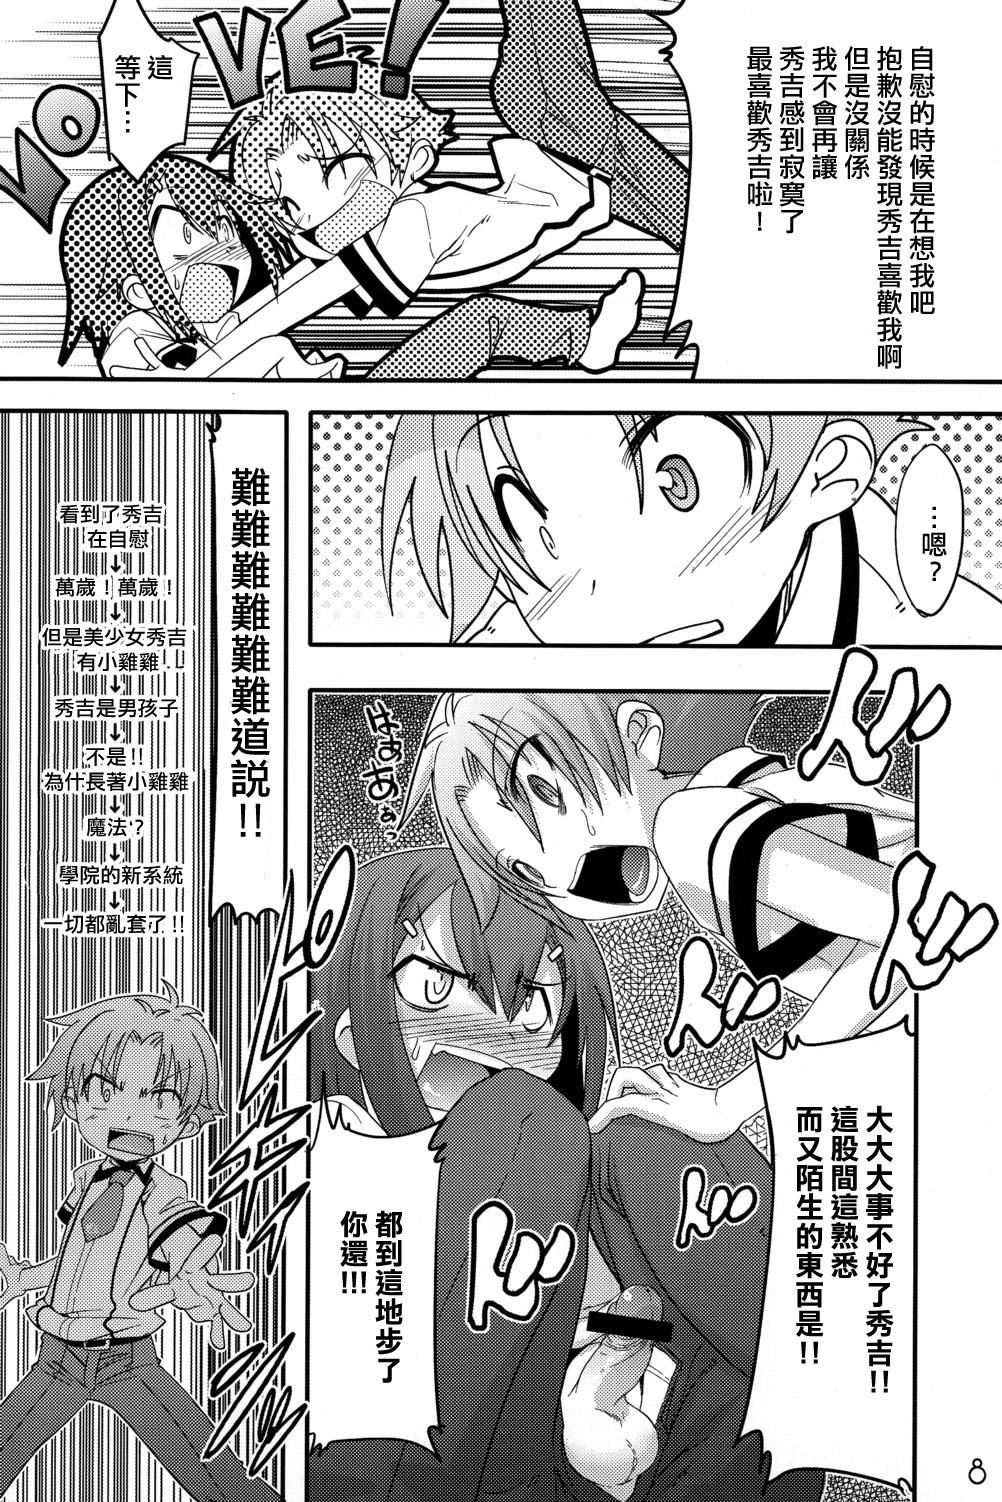 Blackmail Fortune Favours Fools - Baka to test to shoukanjuu Price - Page 7